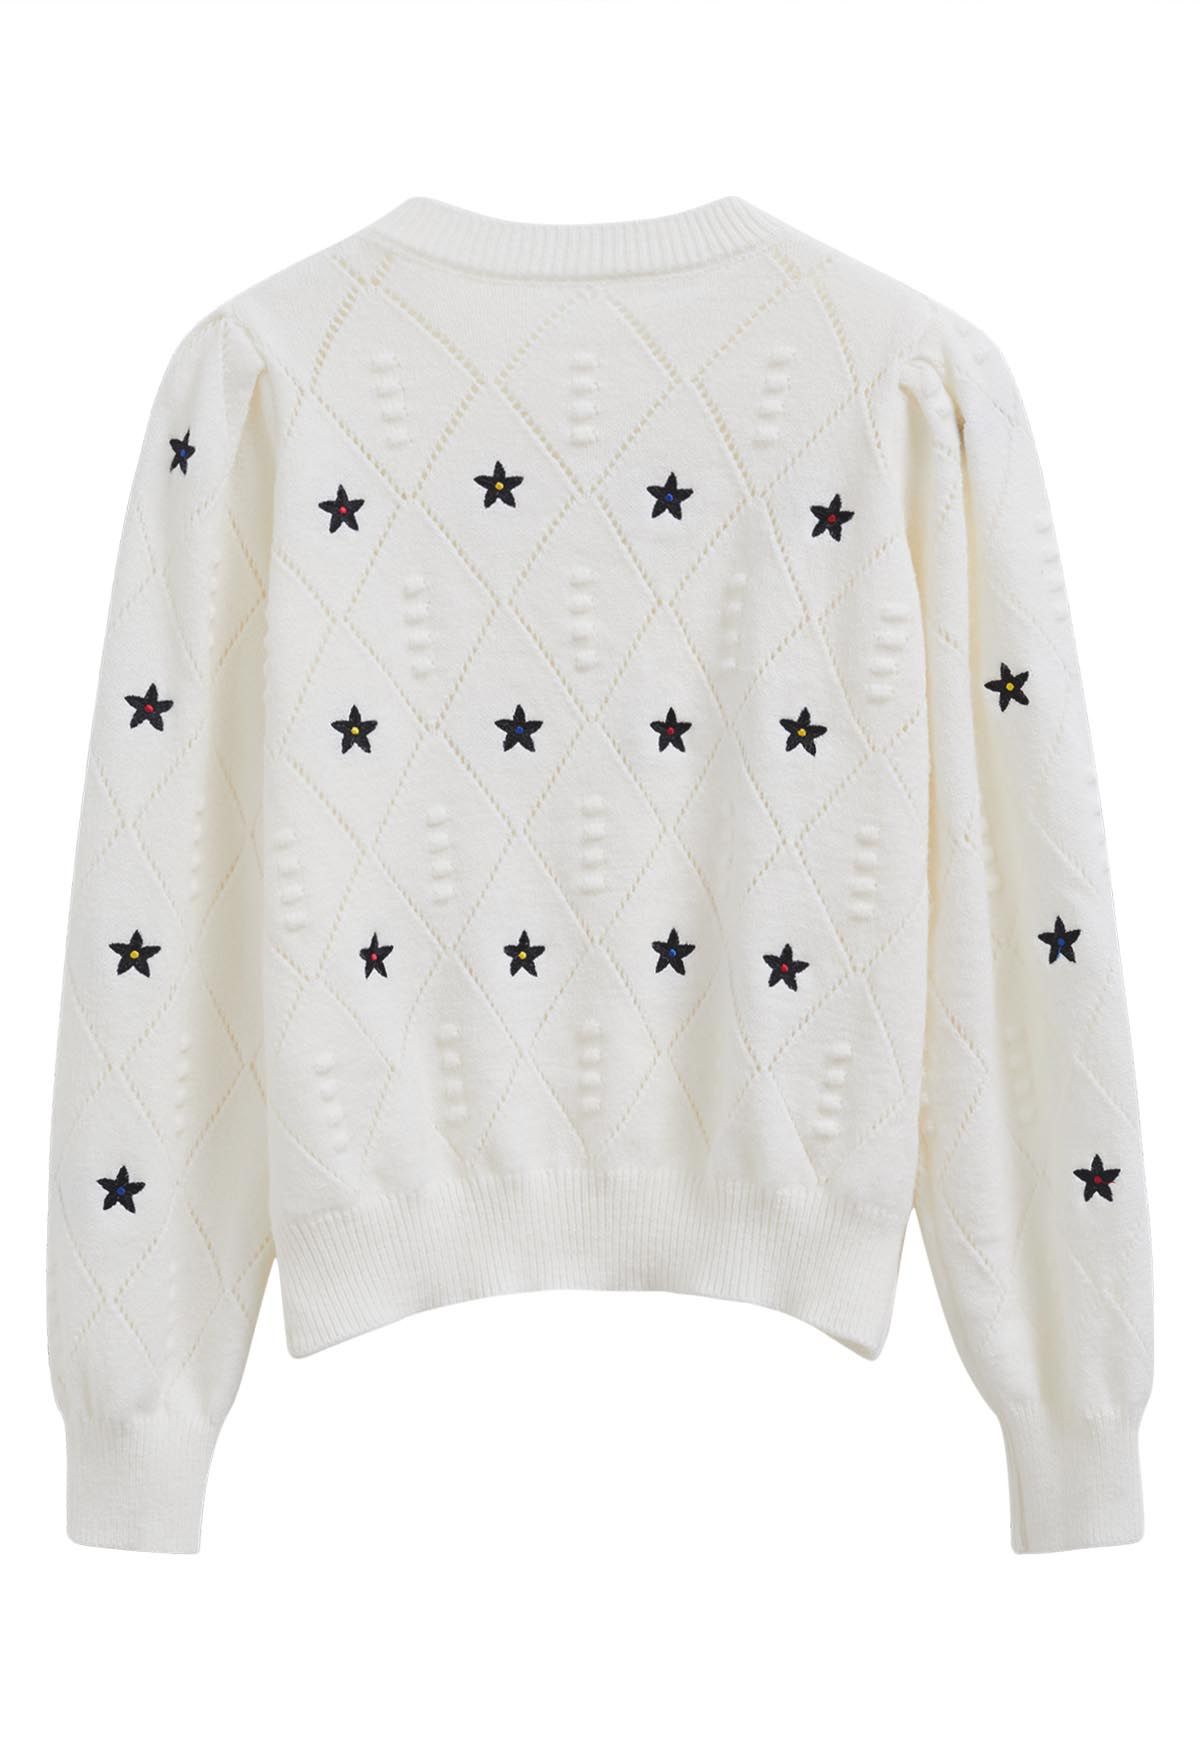 Star Embroidery Pointelle Knit Top in White